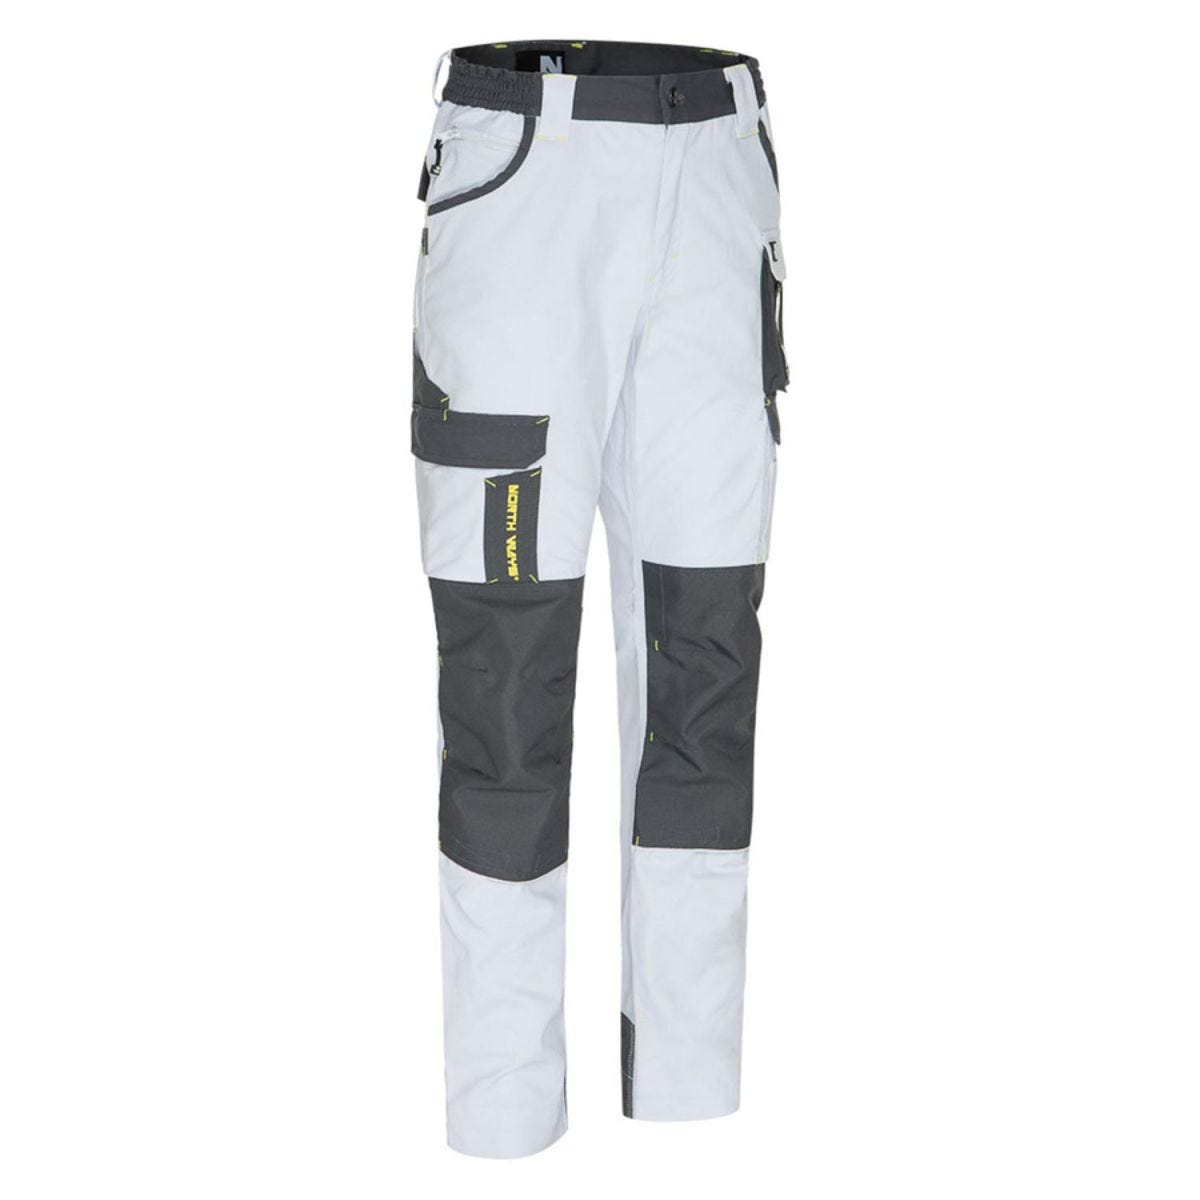 Pantalon de travail multipoches Cary blanc - North Ways - Taille 56 0